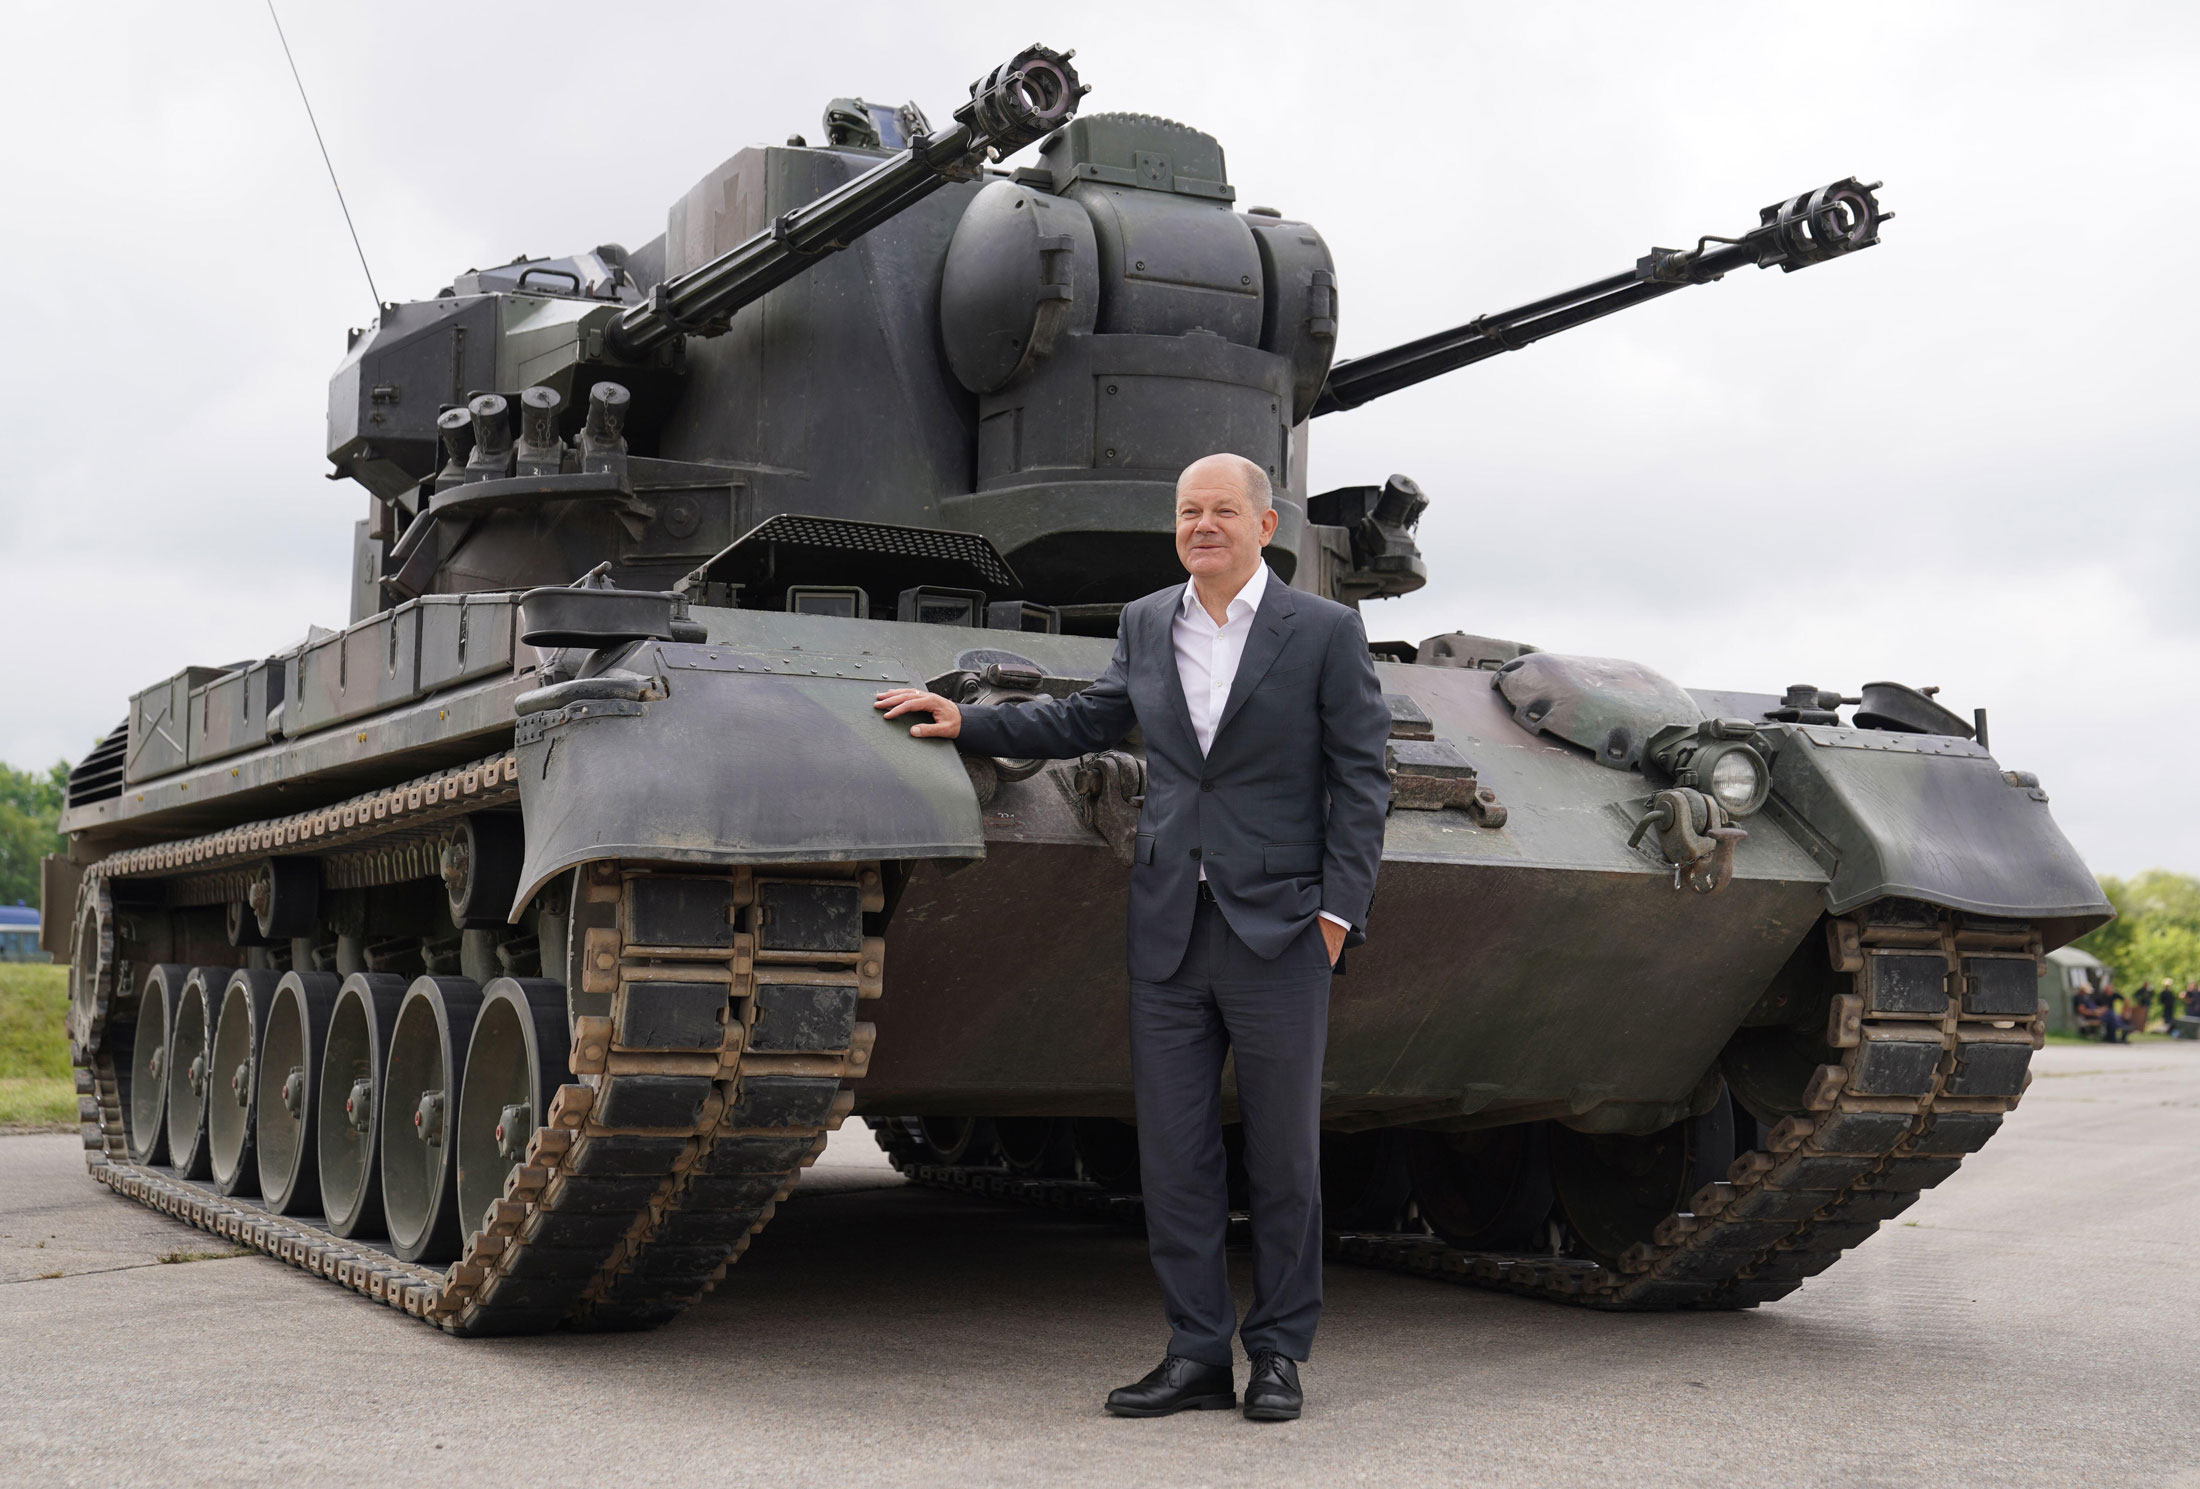 European Main Battle Tank Could Be Armed with a Massive 'Gun